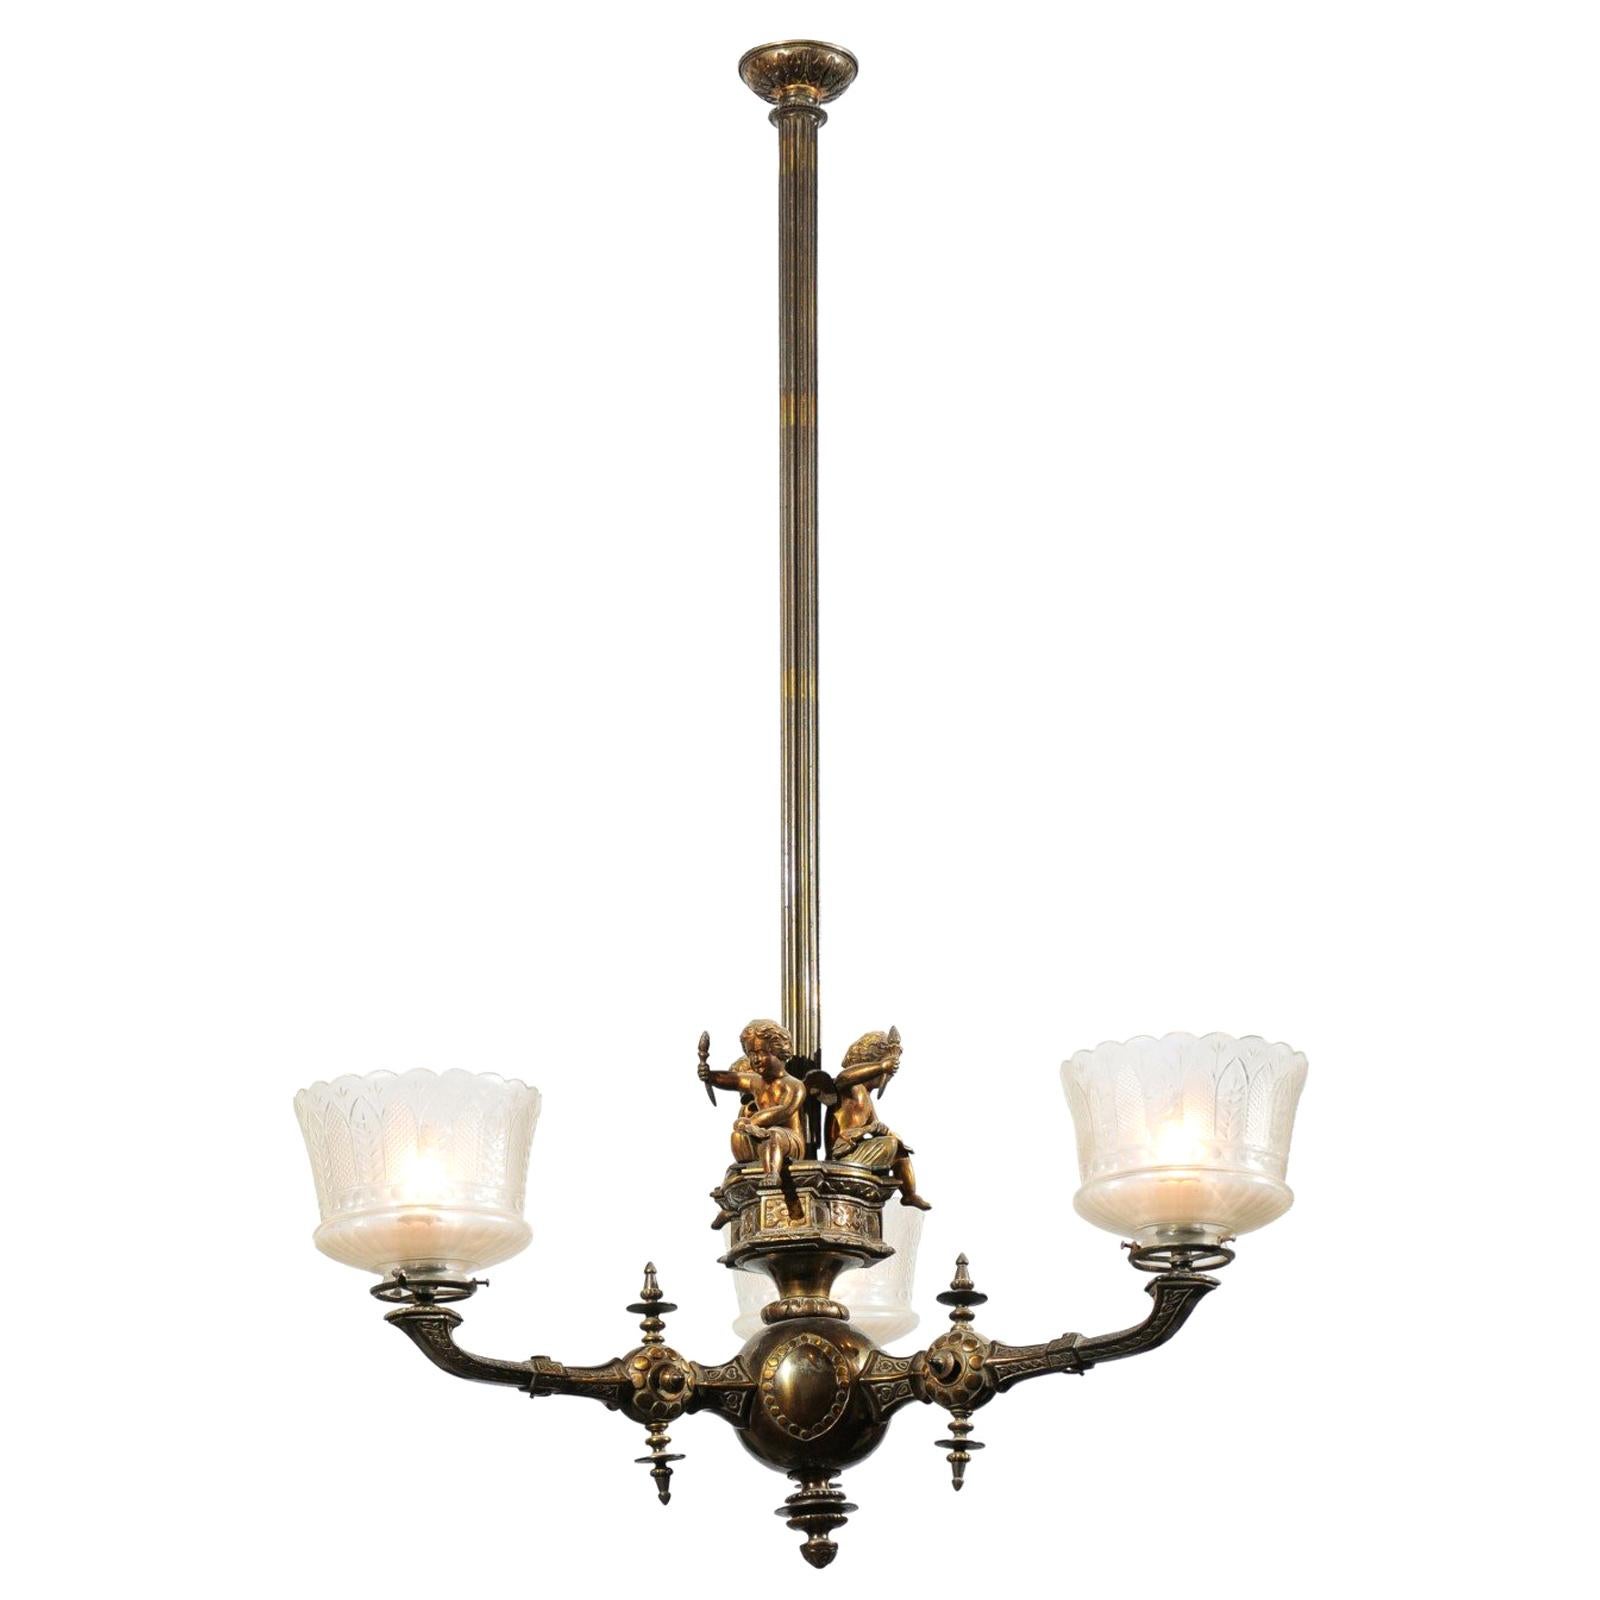 French 19th Century Three-Light Bronze and Baccarat Chandelier with Cherubs For Sale